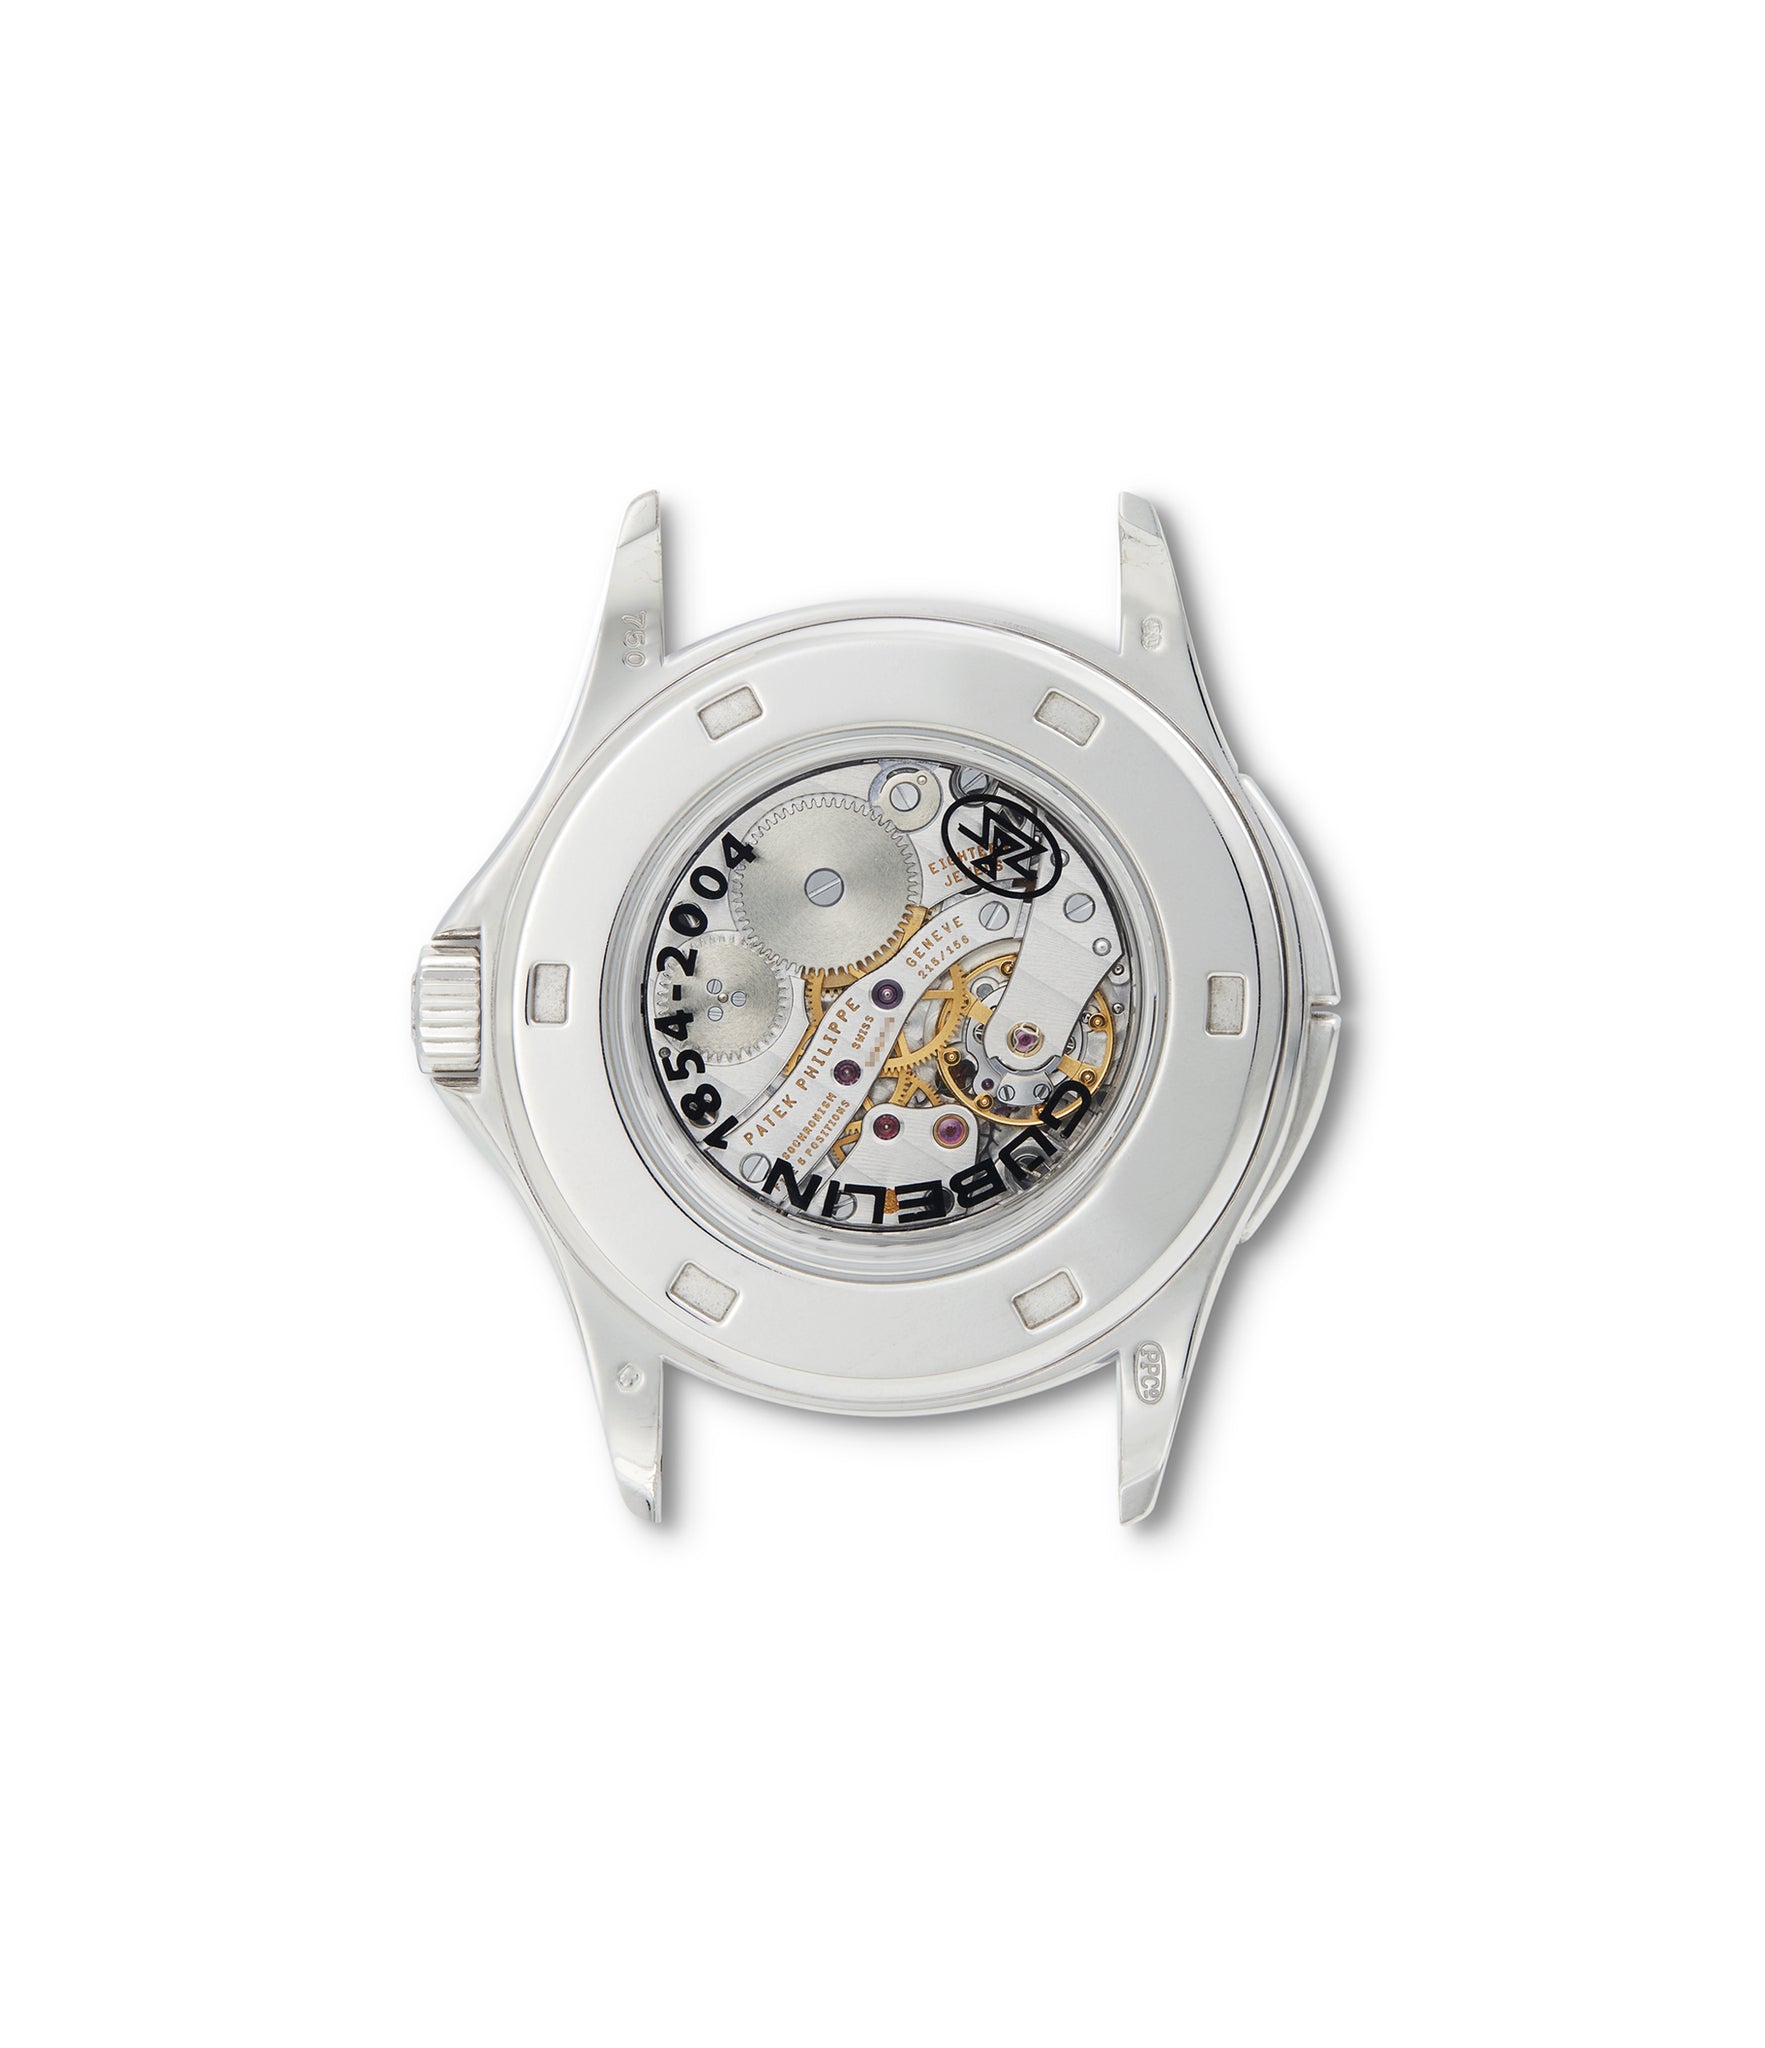 caseback Patek Philippe "Calatrava Travel Time, Gübelin 150th Anniversary" 5134G White Gold preowned watch at A Collected Man London